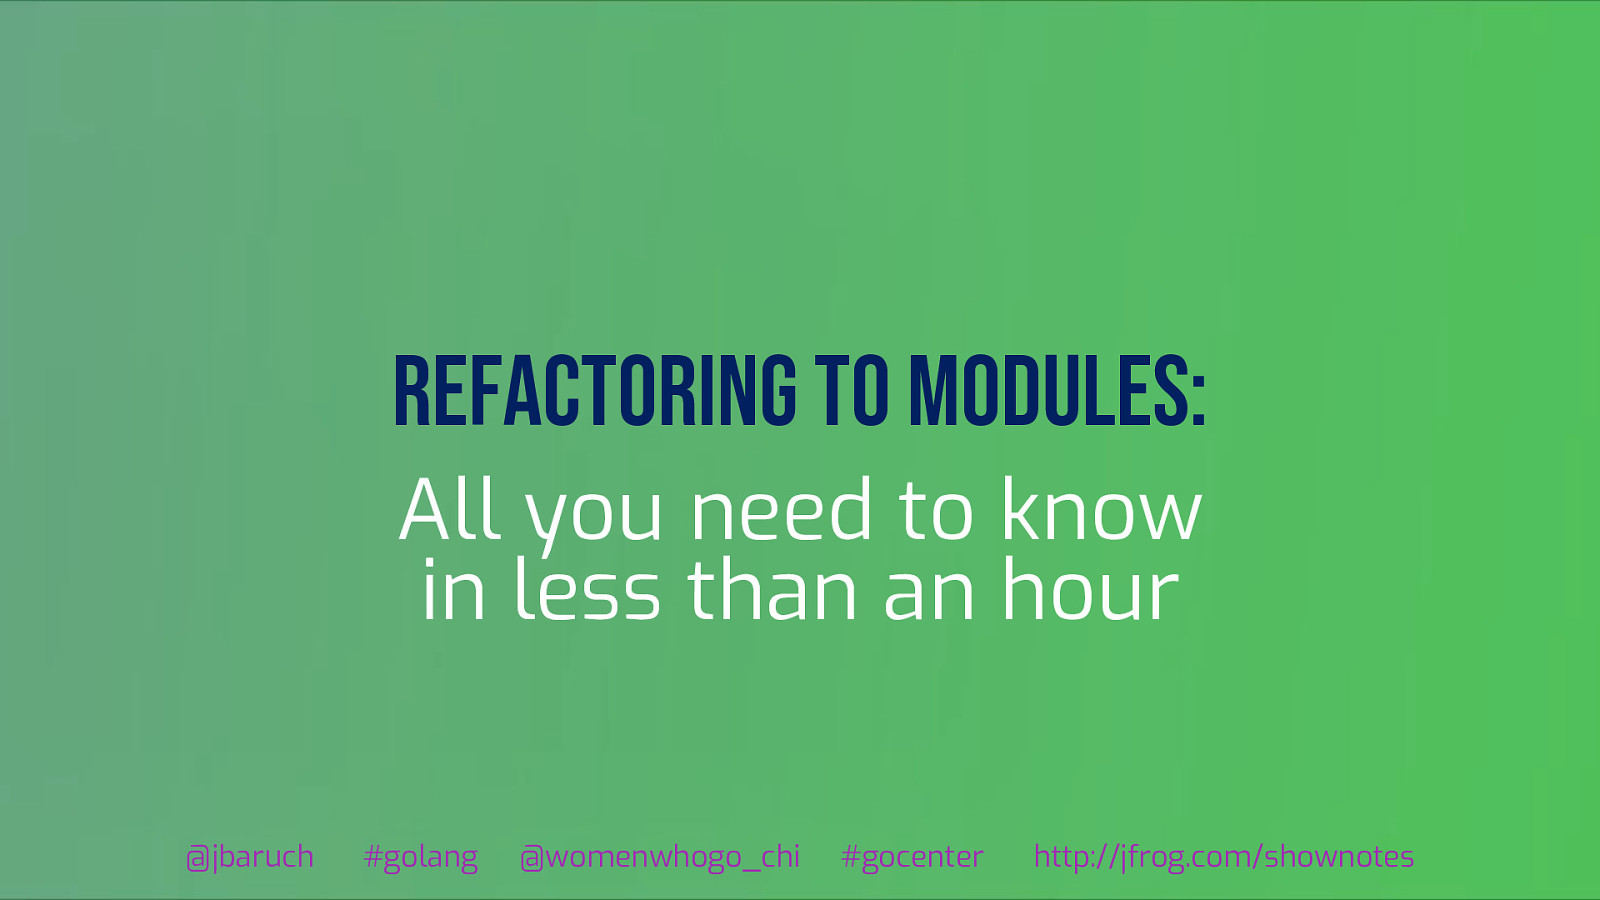 Go Modules: Why and how – all you need to know in less than an hour